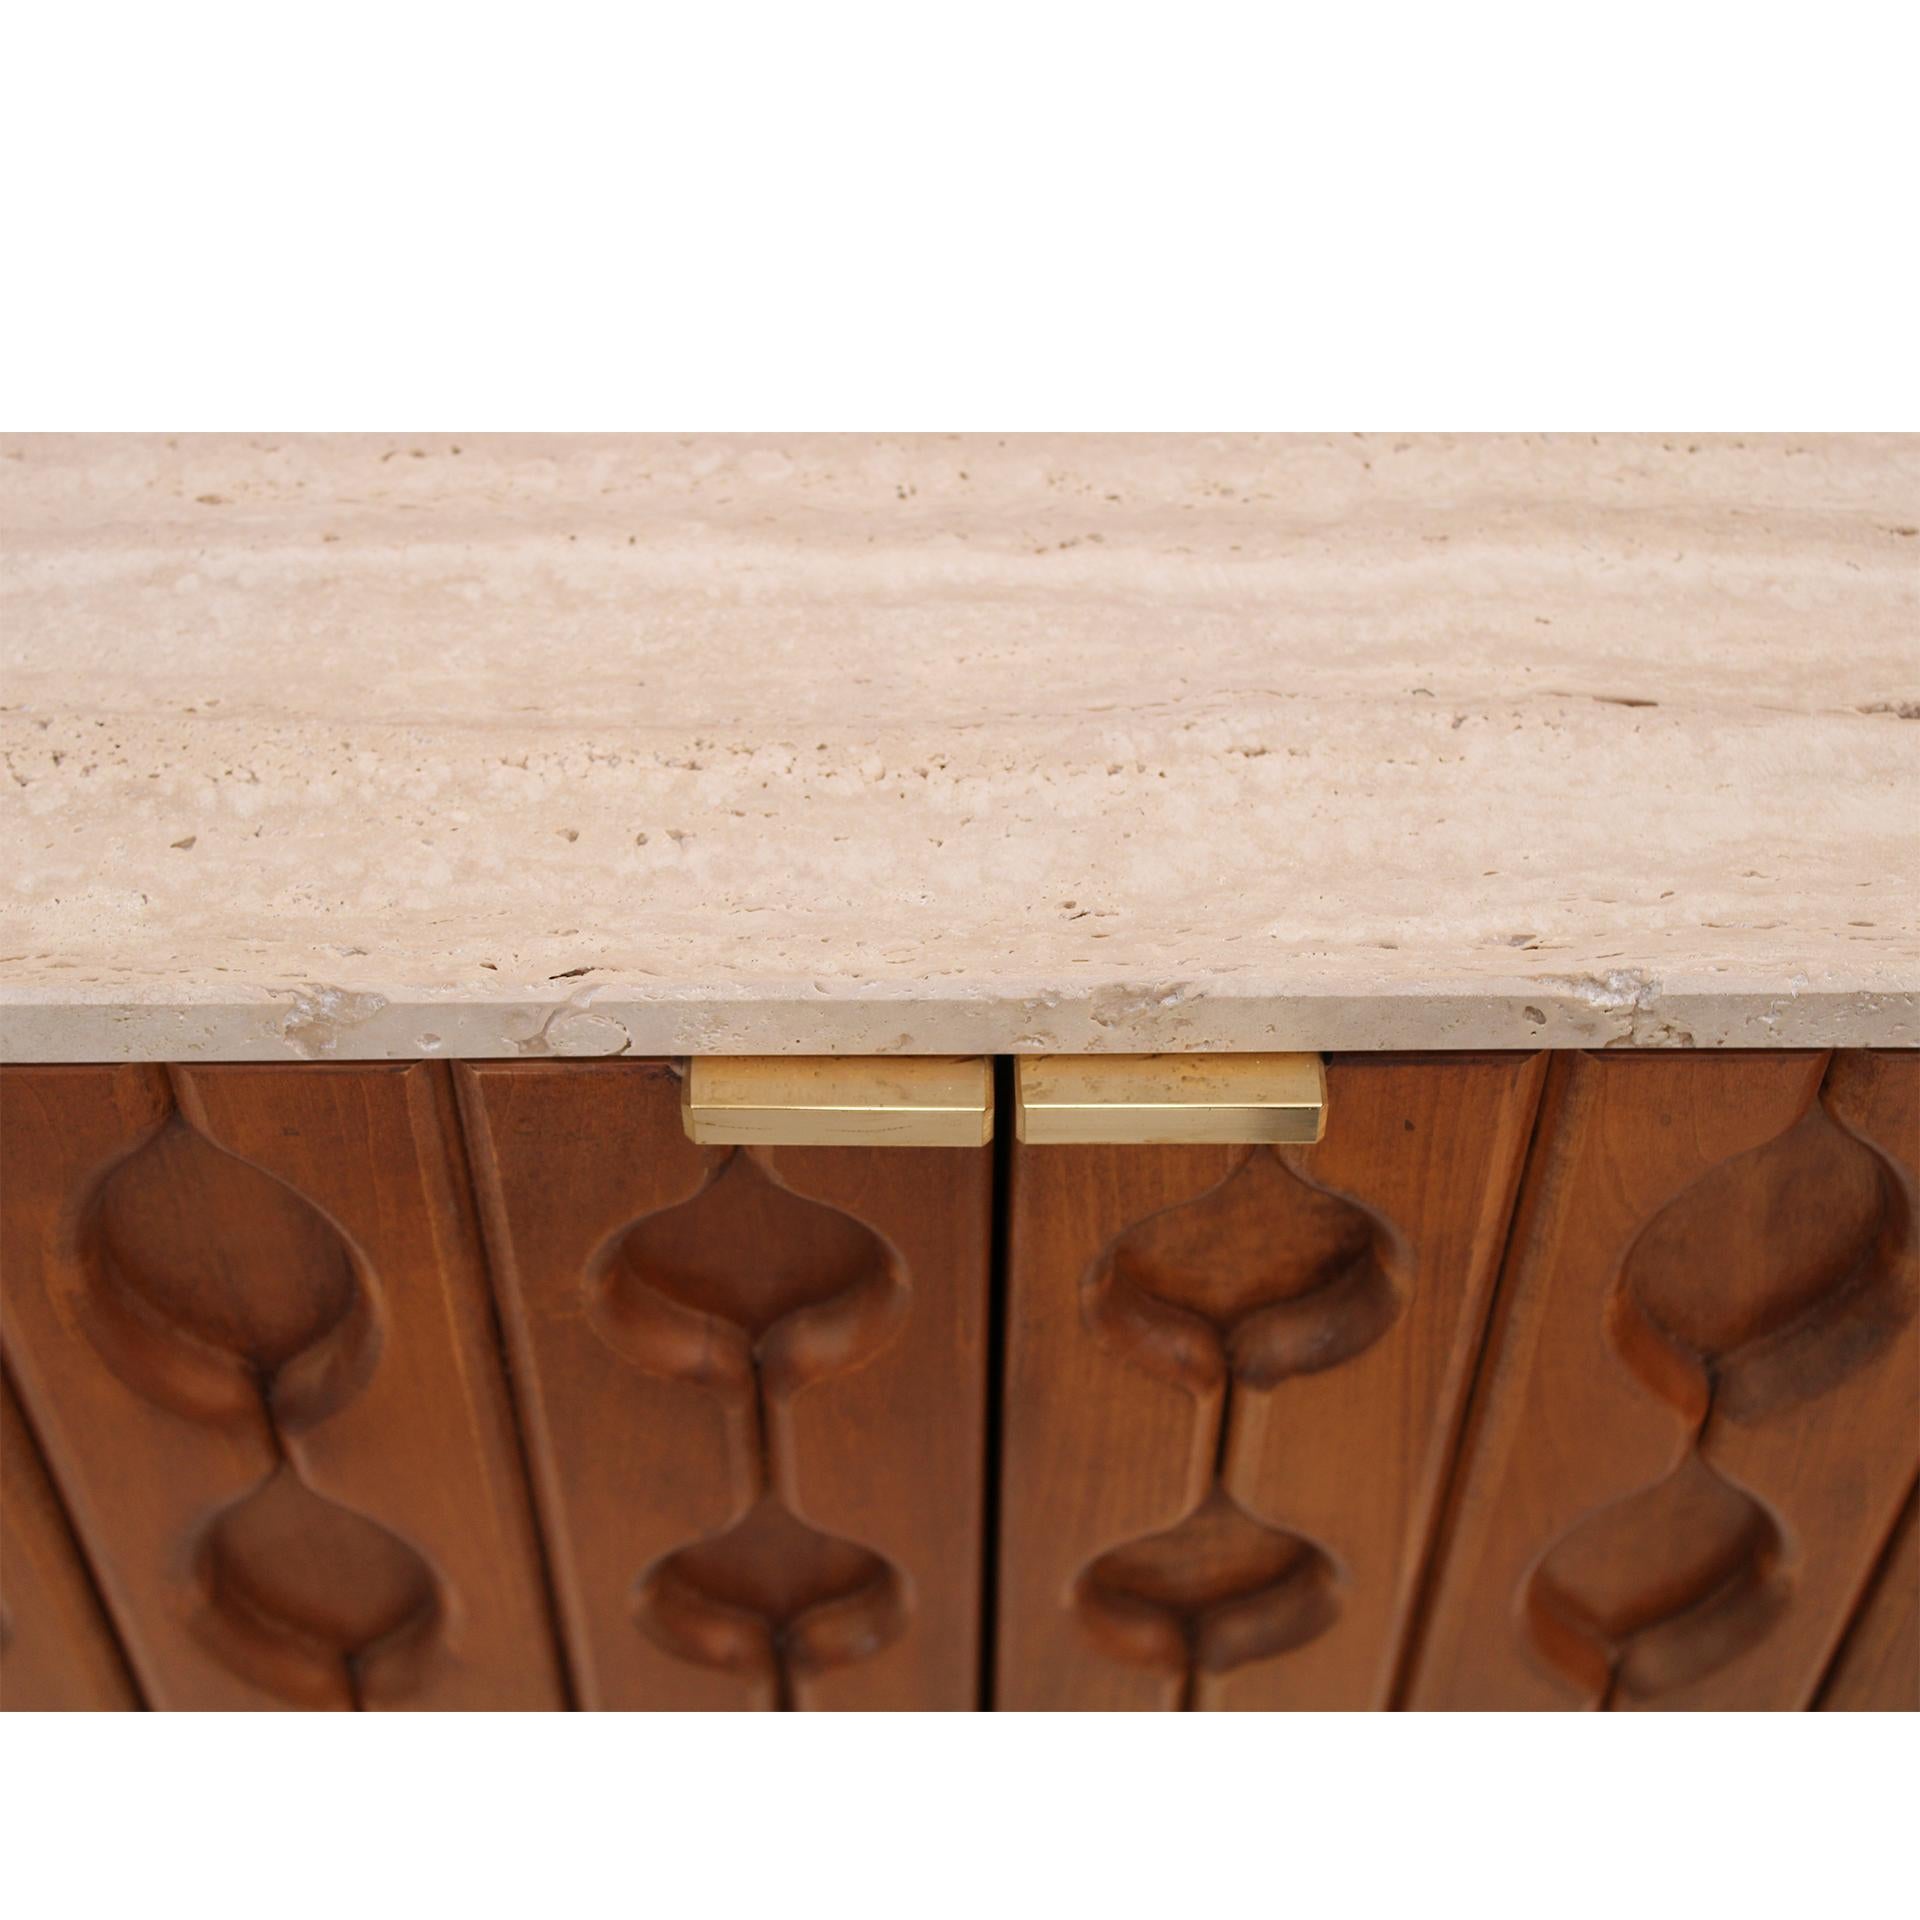 Contemporary Pair of Italian Sideboards Made of Solid Wood and Travertine For Sale 5